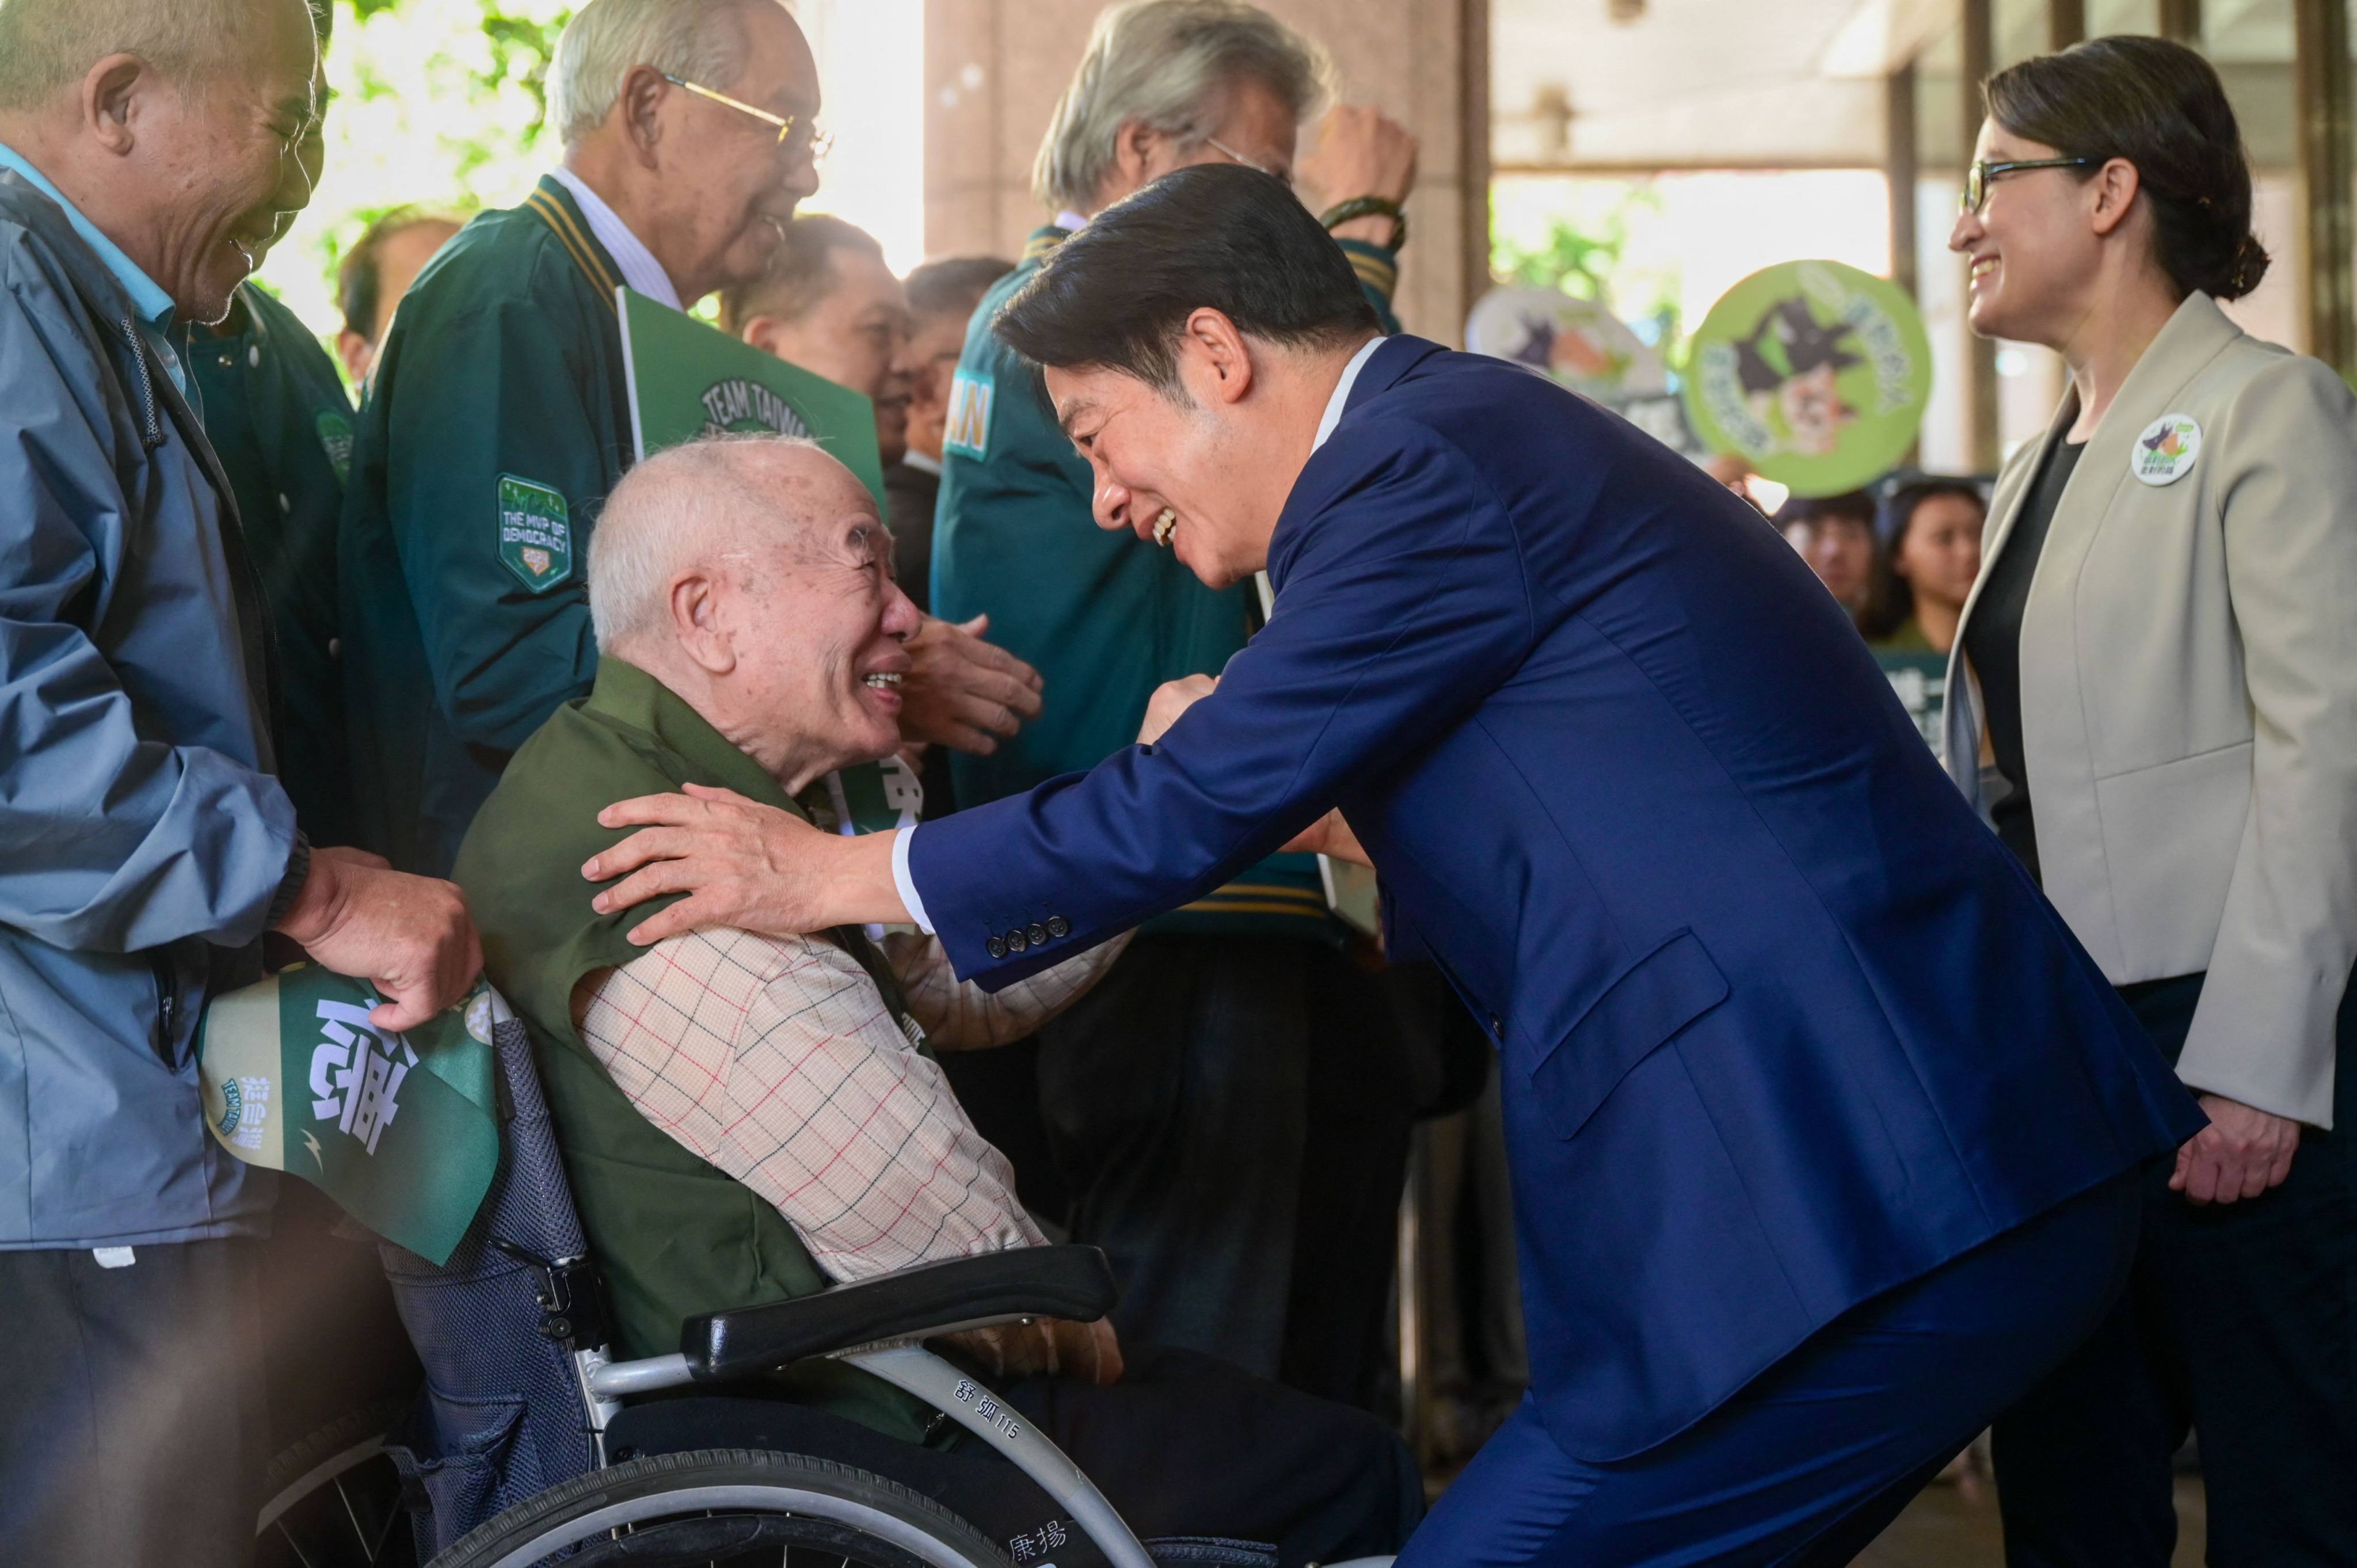 Taiwanese presidential candidate William Lai shakes hands with a supporter in Taipei, after registering for the election, on November 21. Photo: AFP